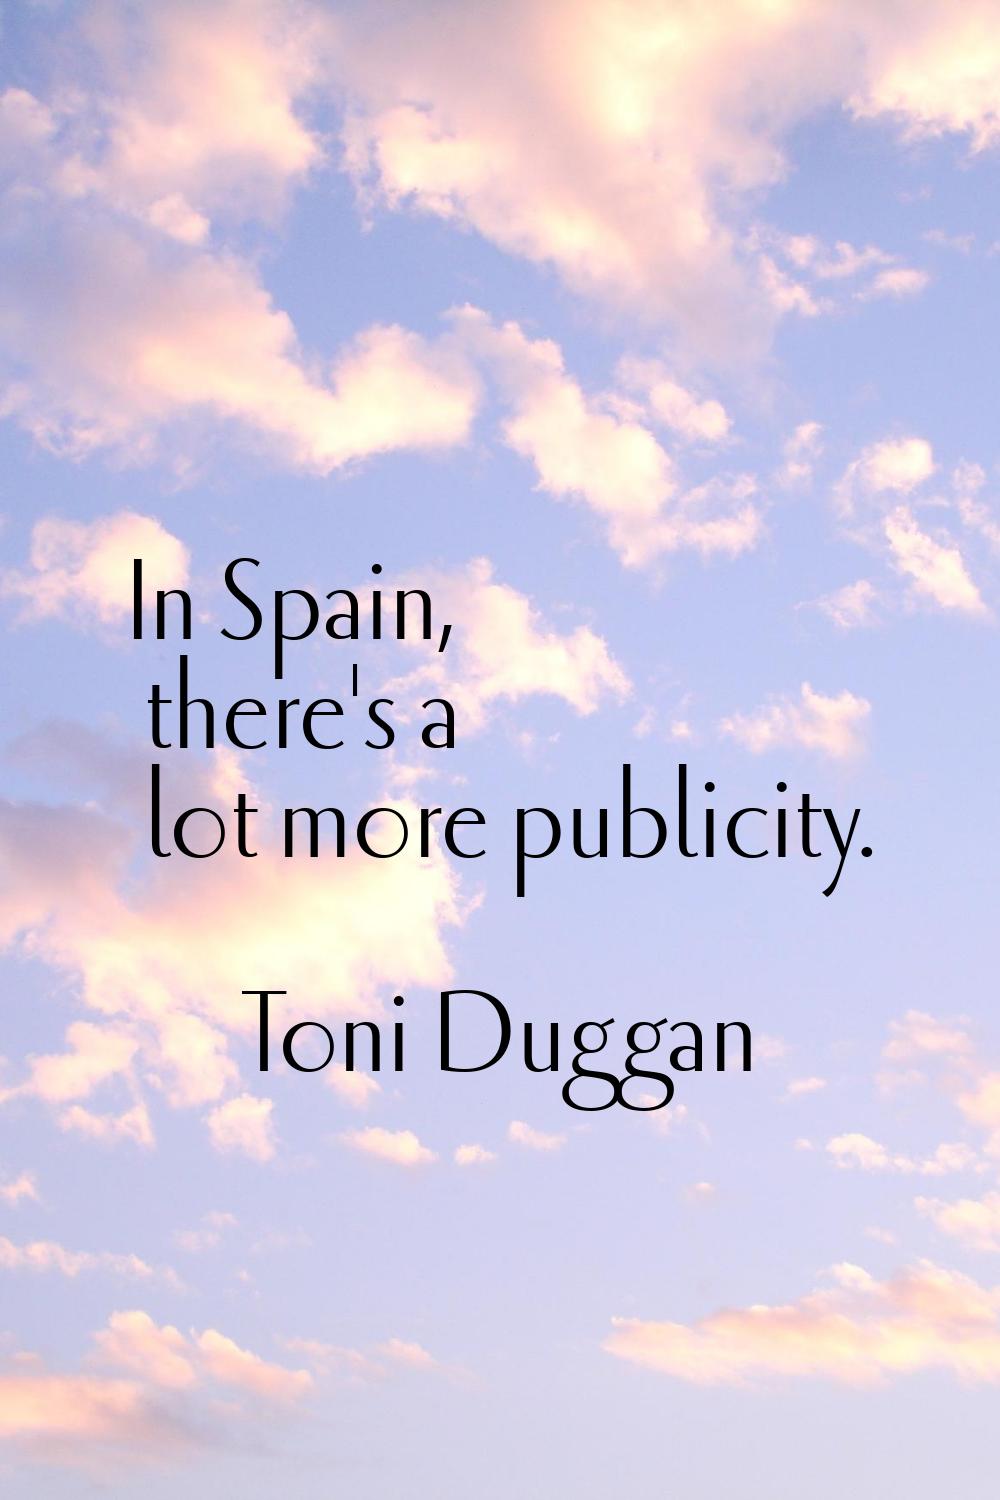 In Spain, there's a lot more publicity.